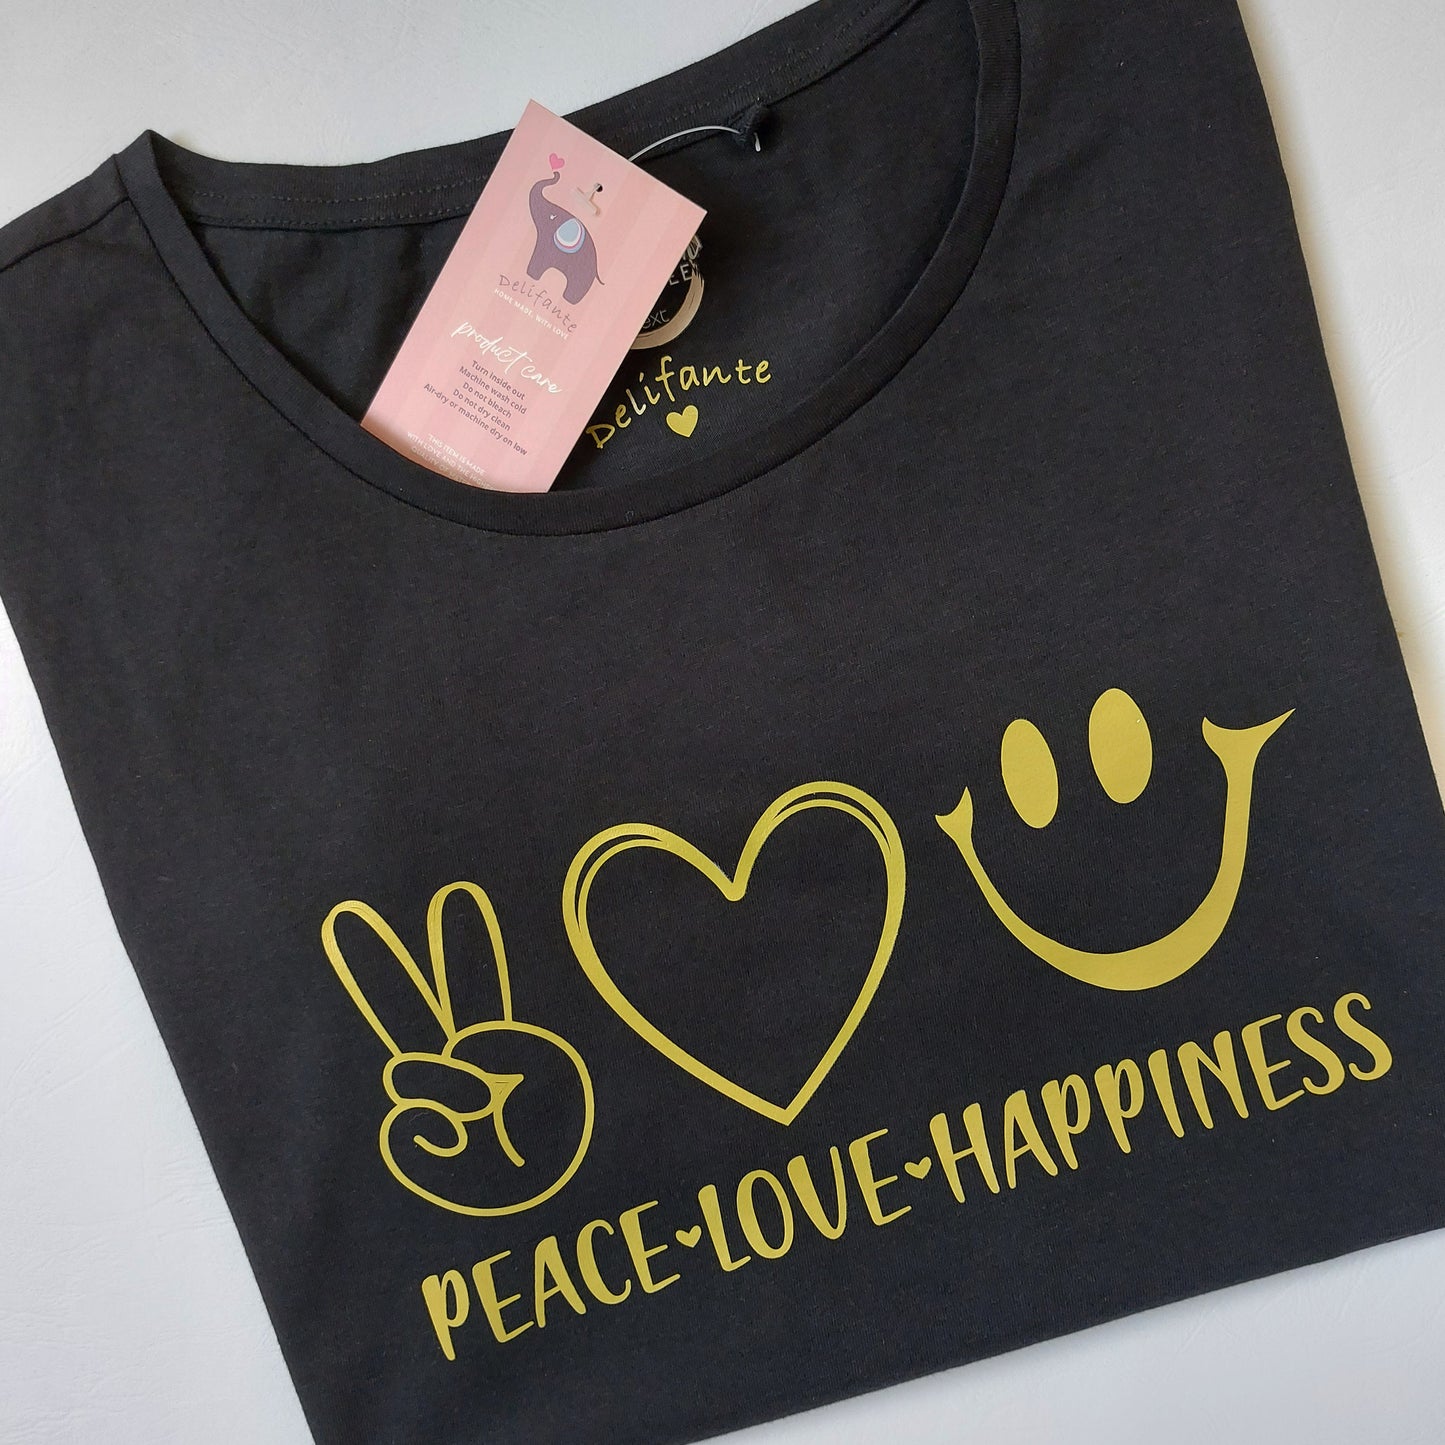 PEACE LOVE HAPPINESS t-shirt